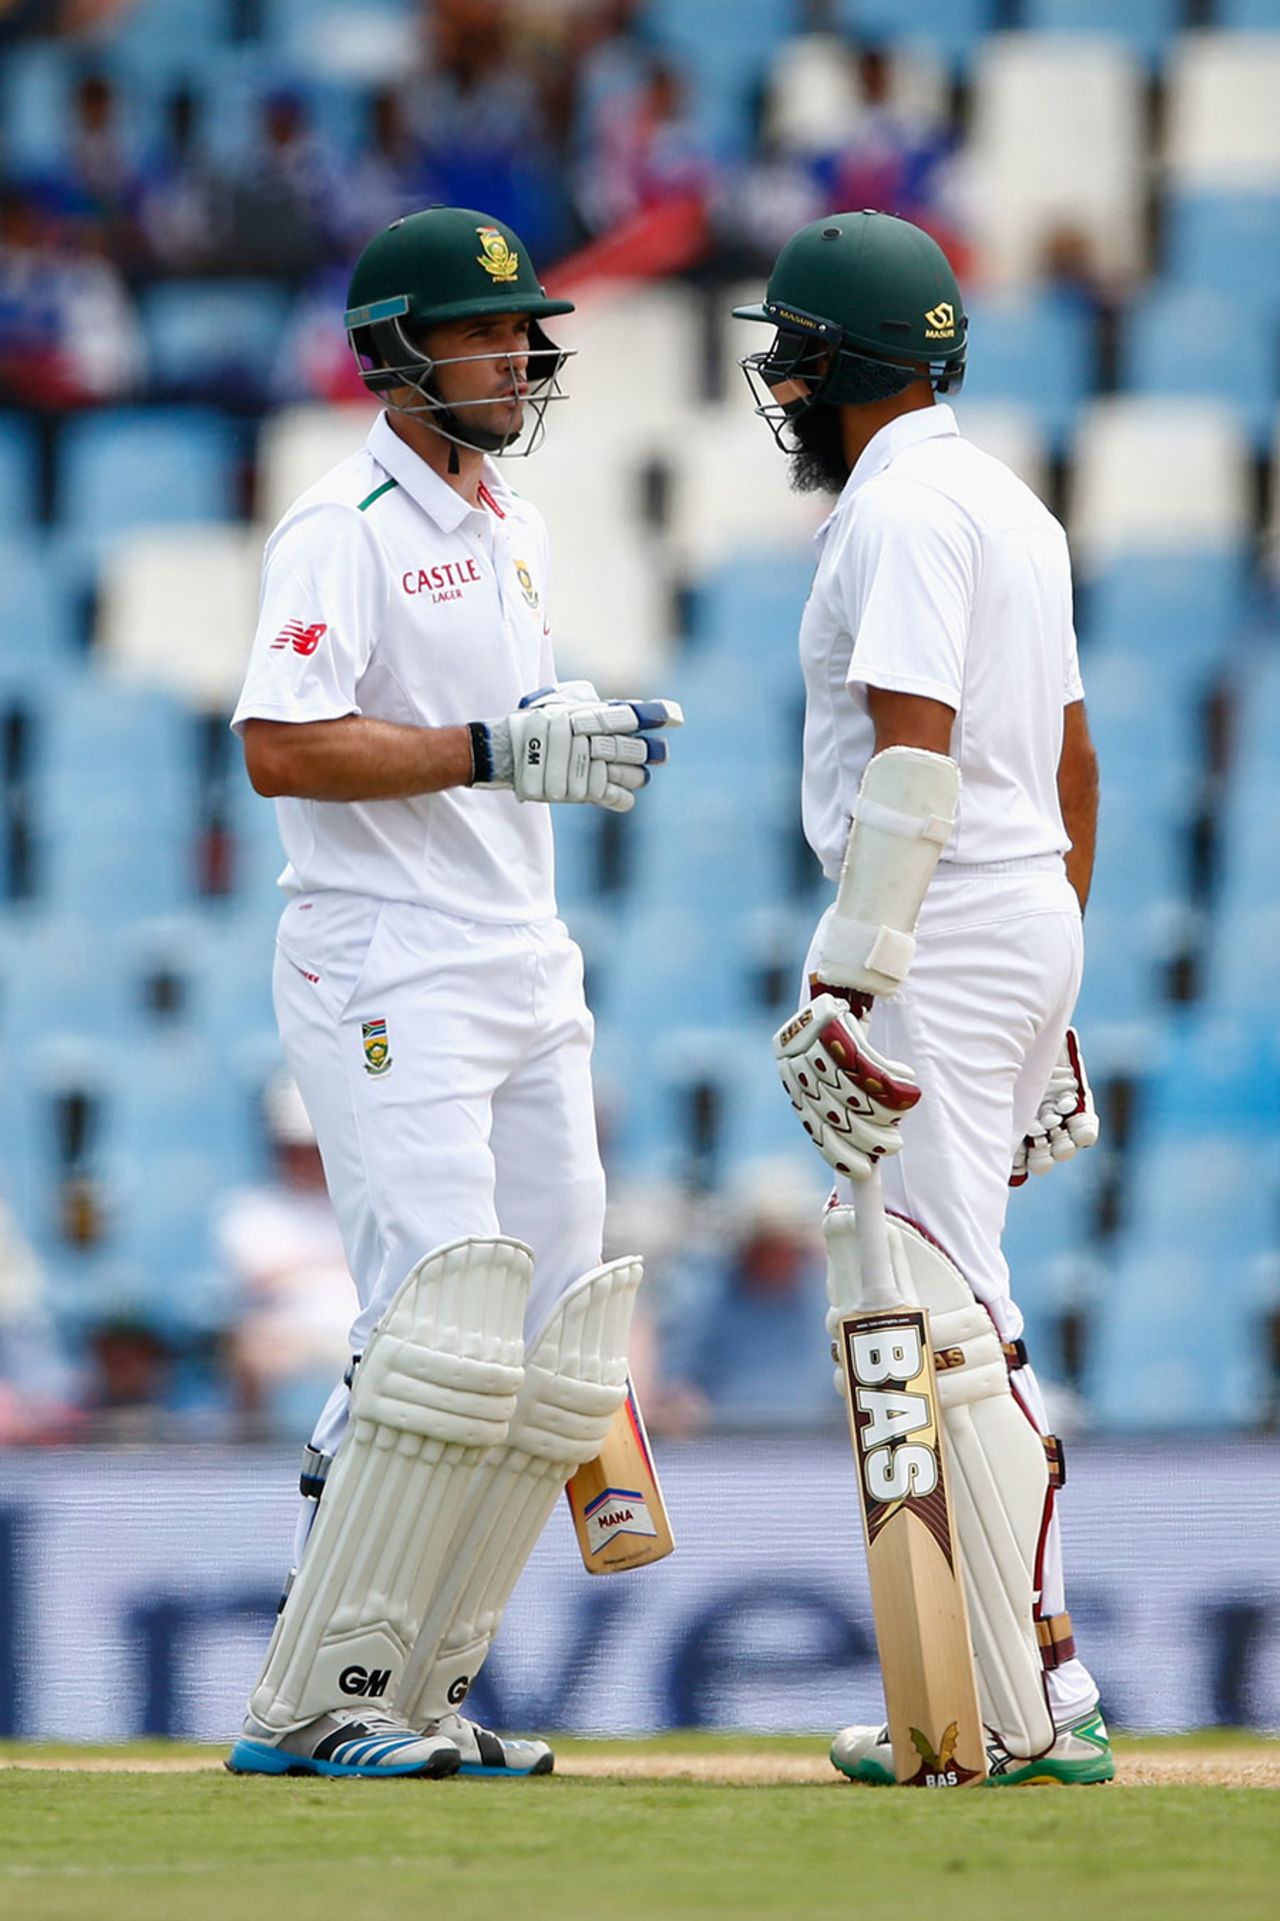 Stephen Cook and Hashim Amla took South Africa to 107 for 1 at lunch, South Africa v England, 4th Test, Centurion, 1st day, January 22, 2016